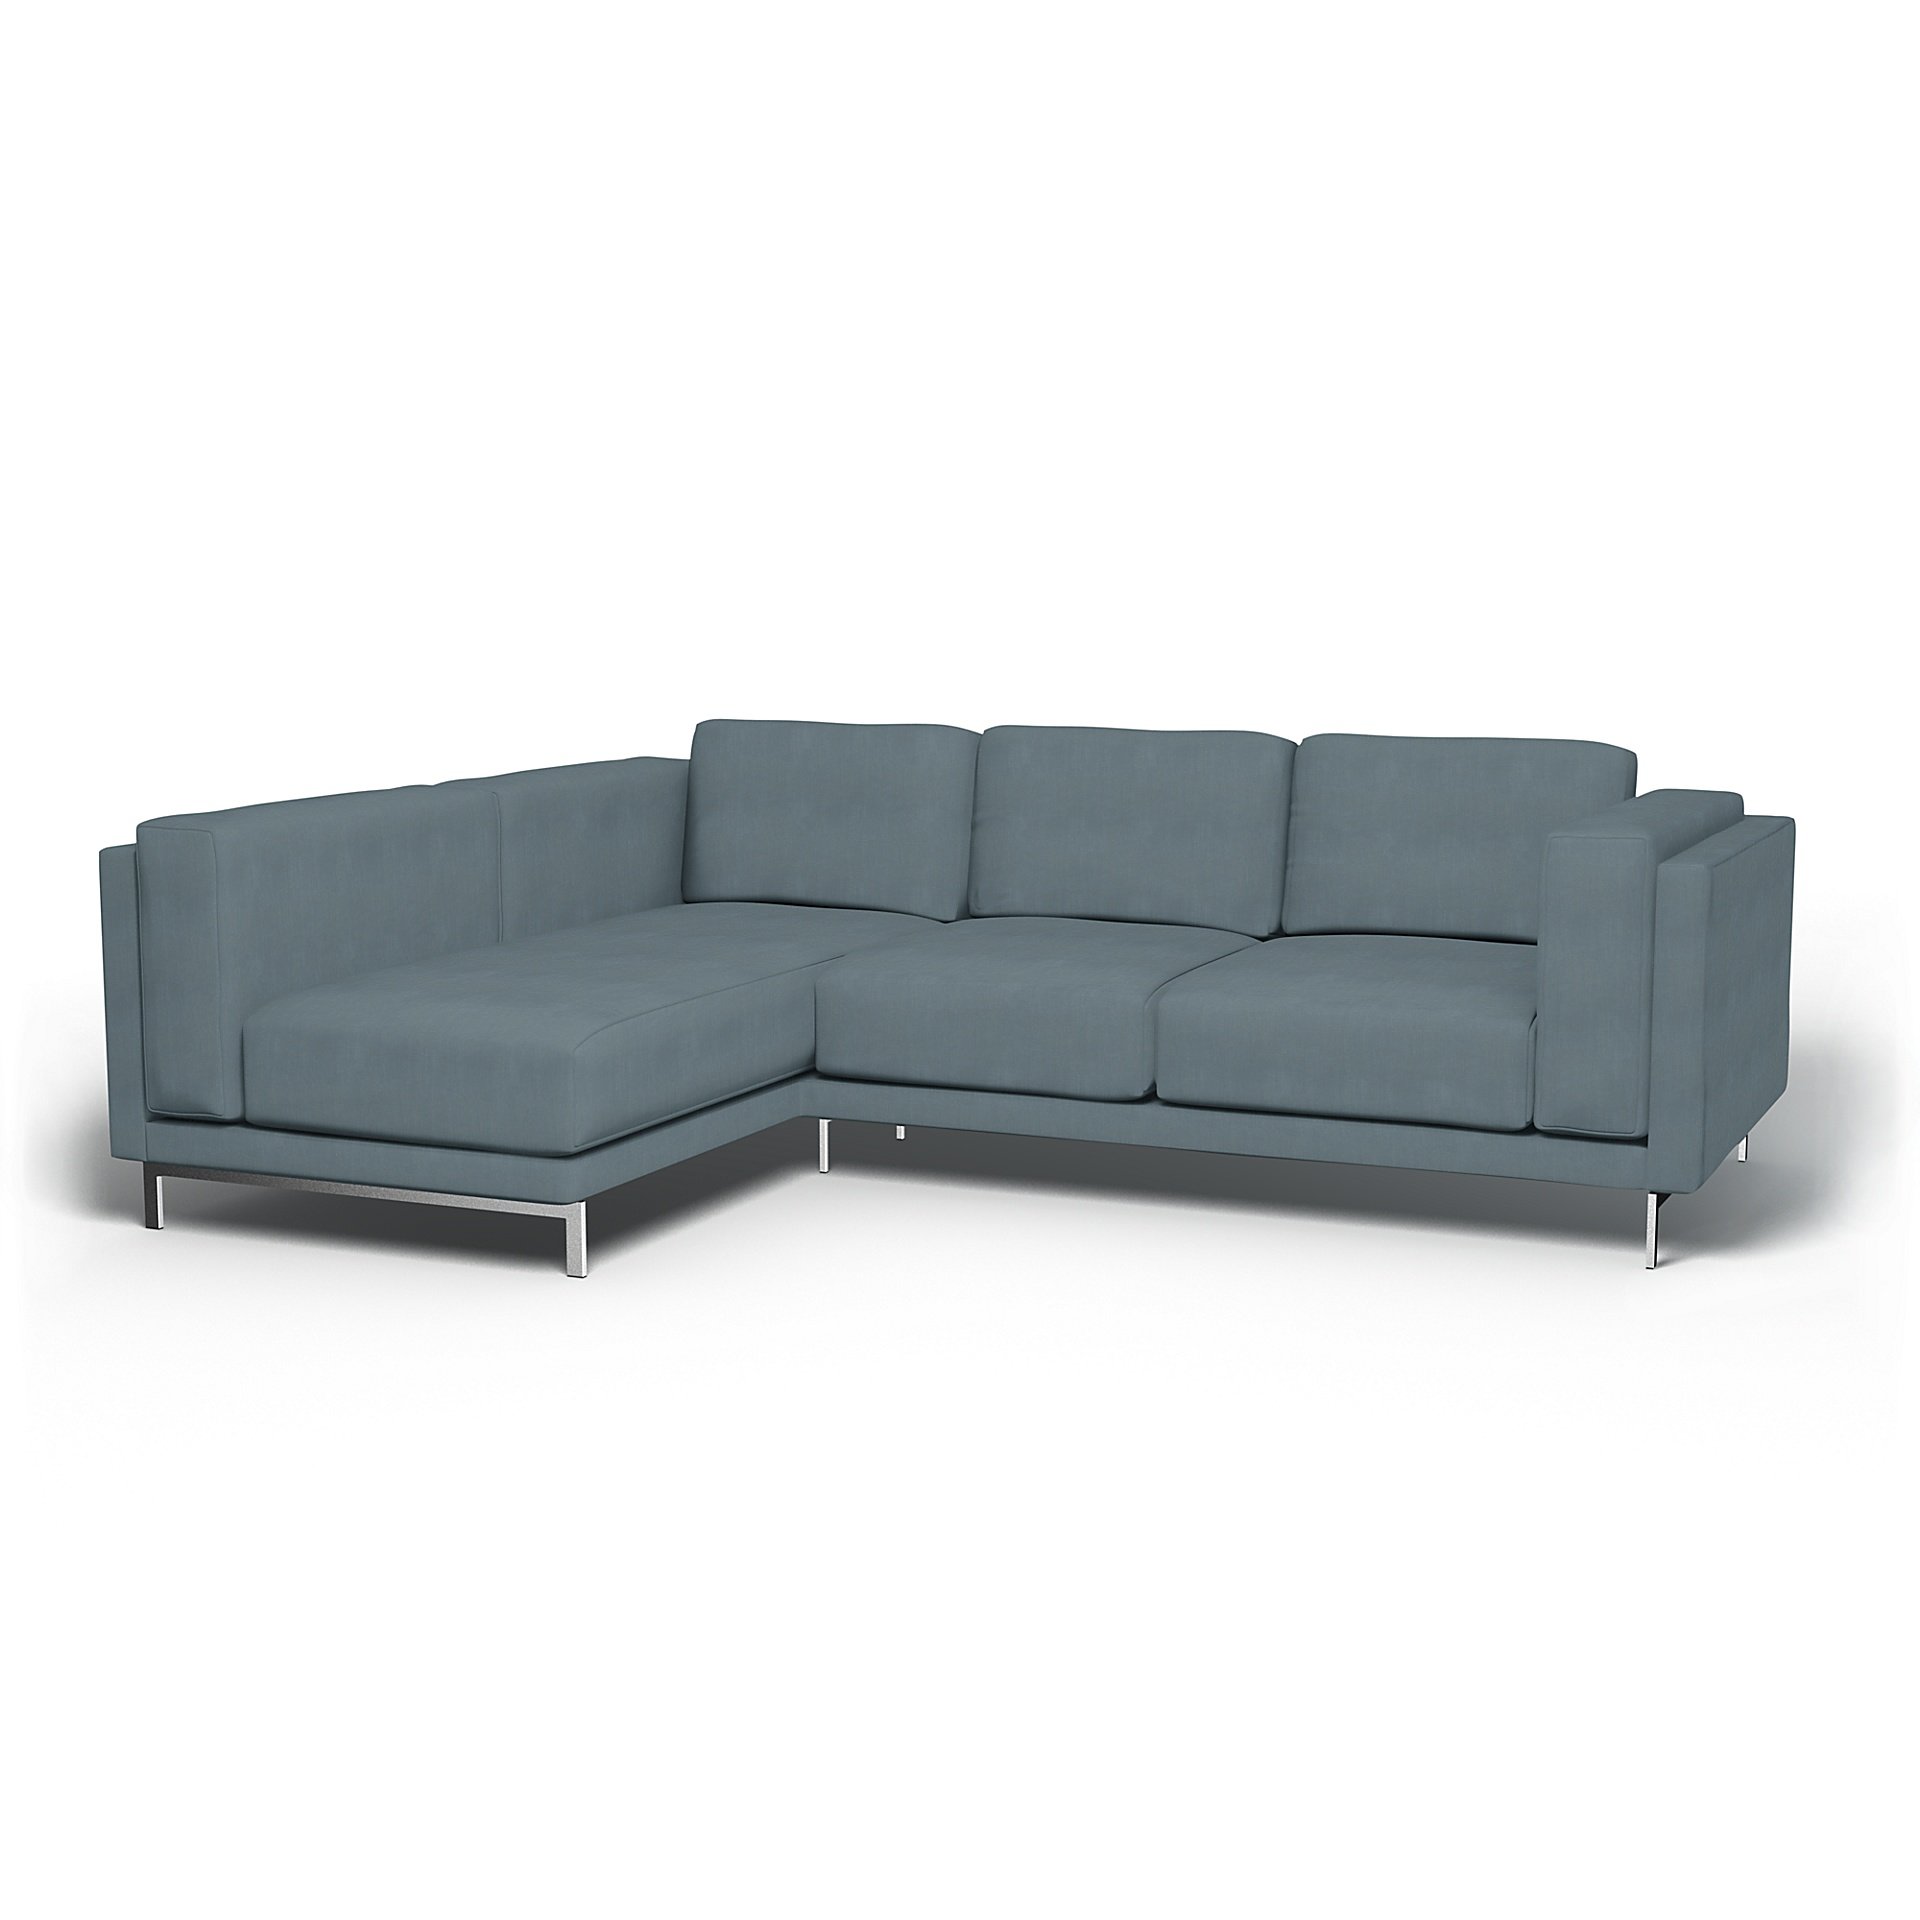 IKEA - Nockeby 3 Seater Sofa with Left Chaise Cover, Dusk, Linen - Bemz